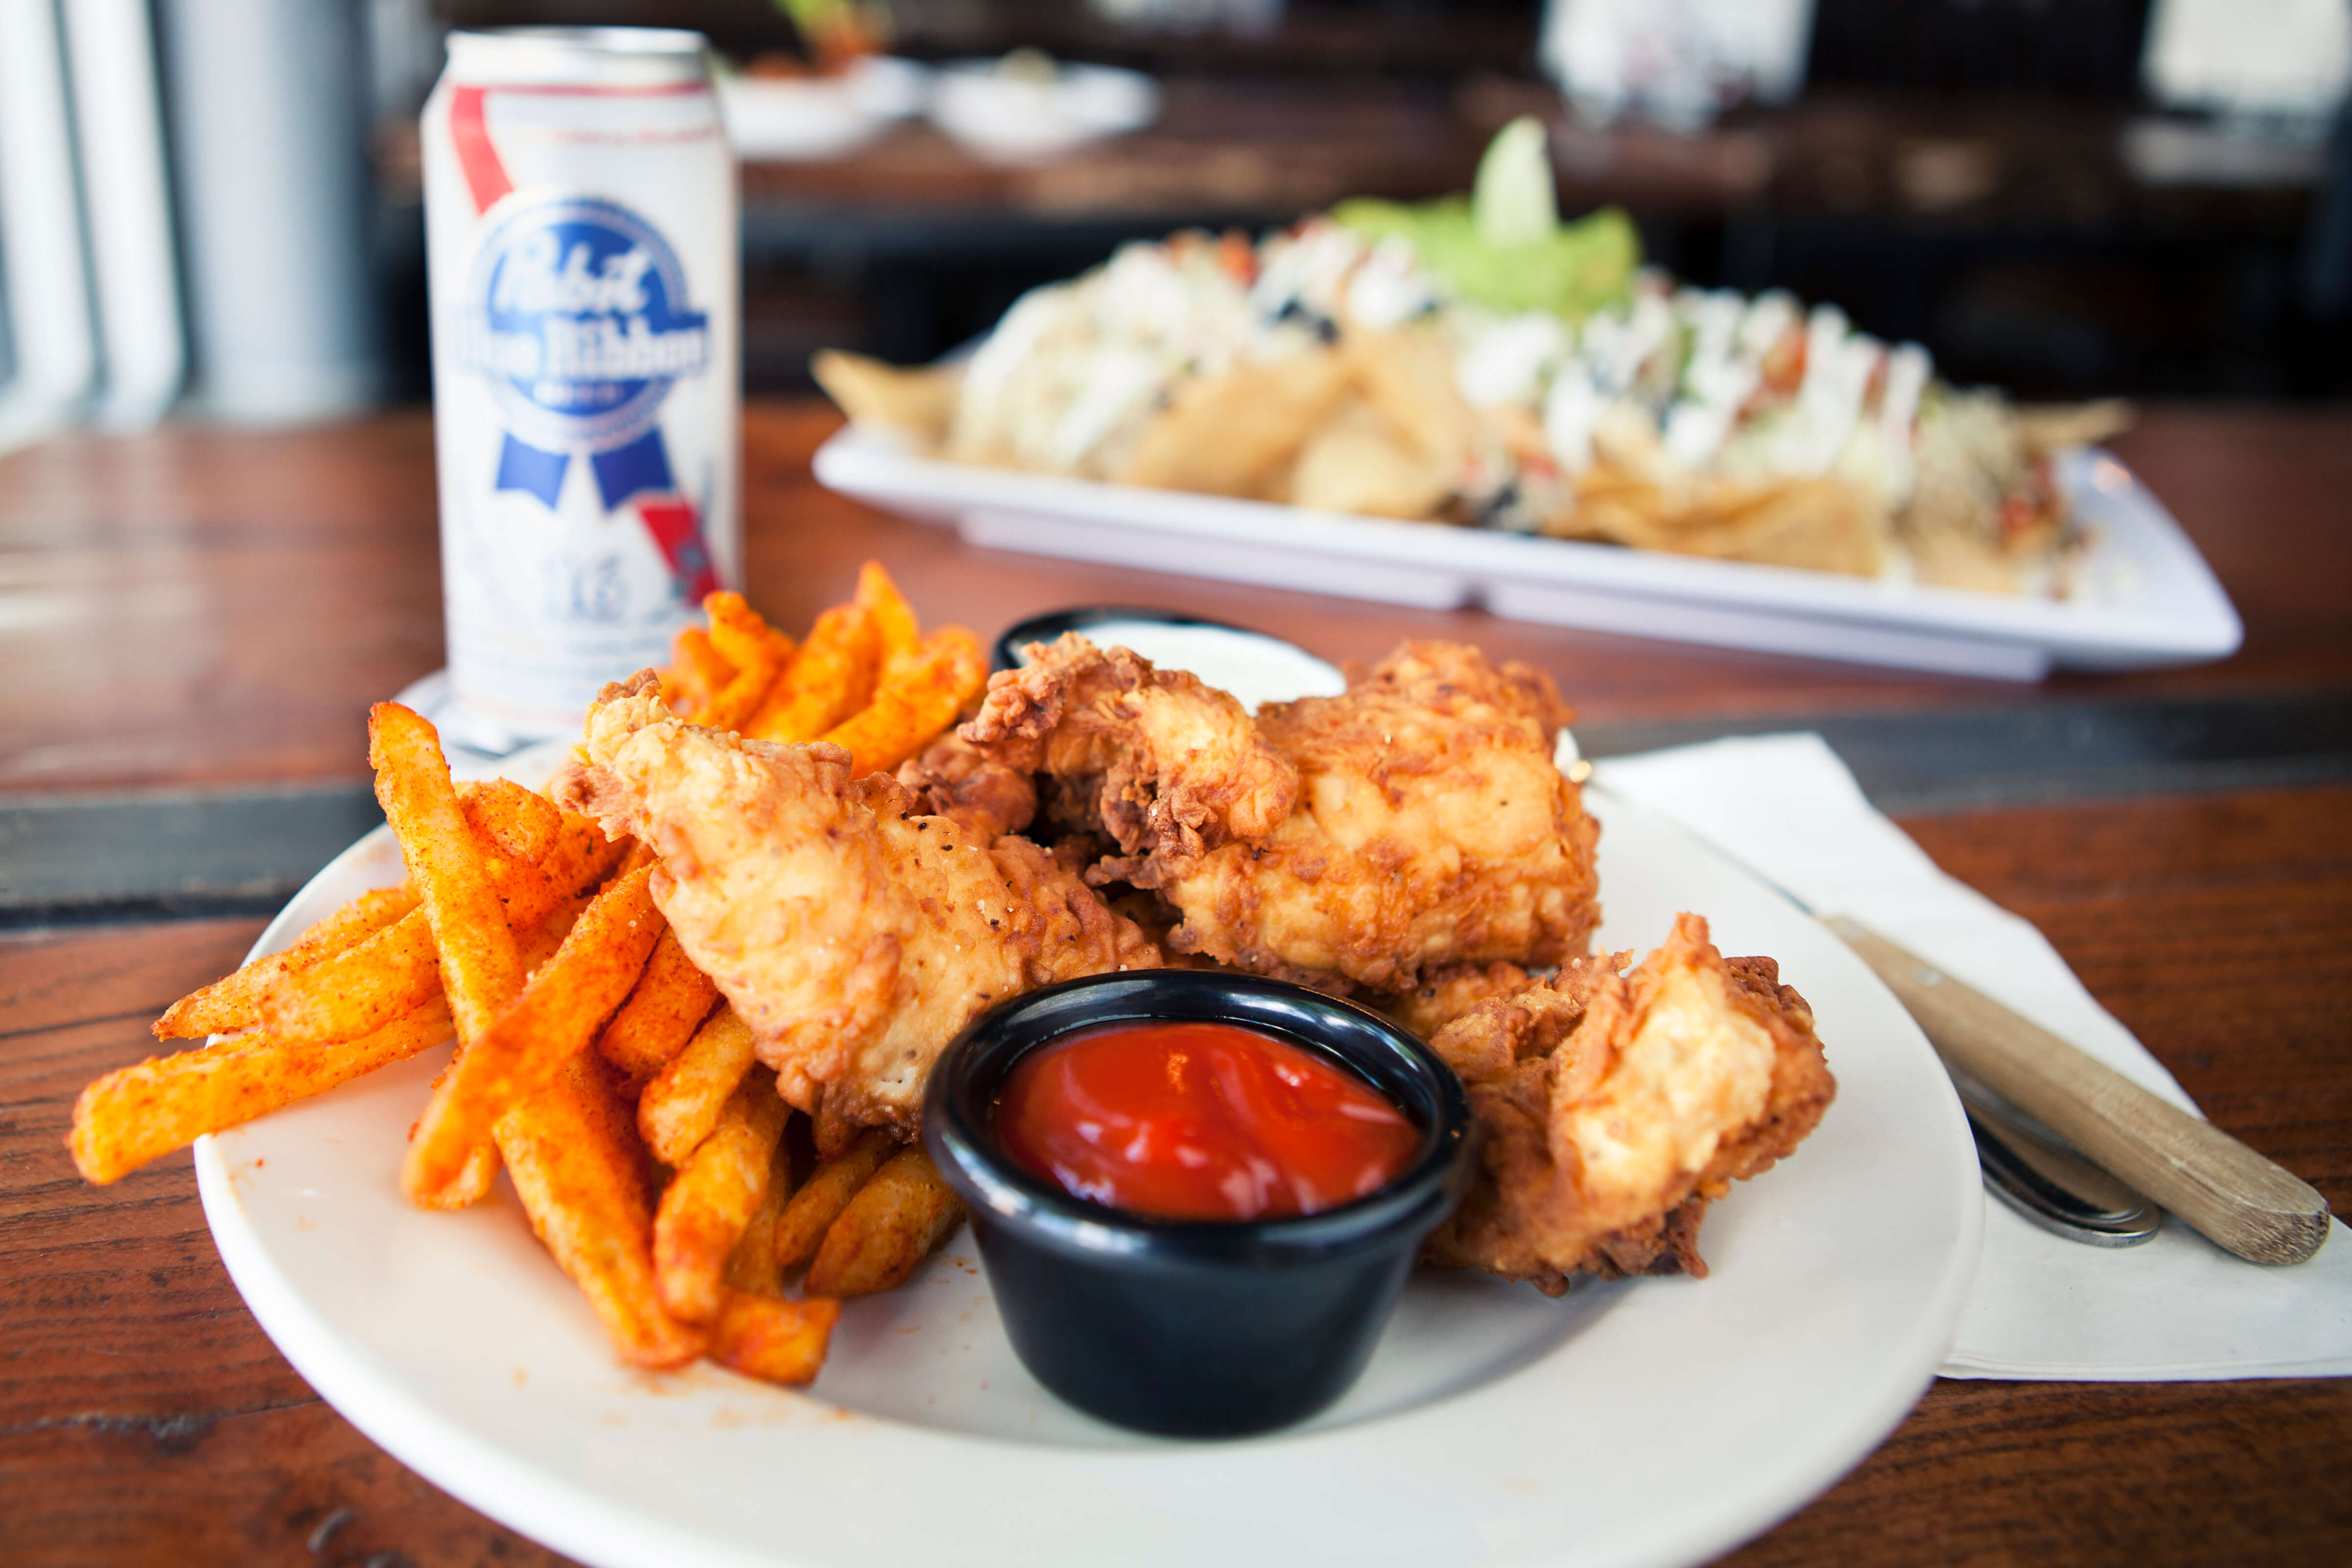 Why Ale House is One of the Best Restaurants Near Independence